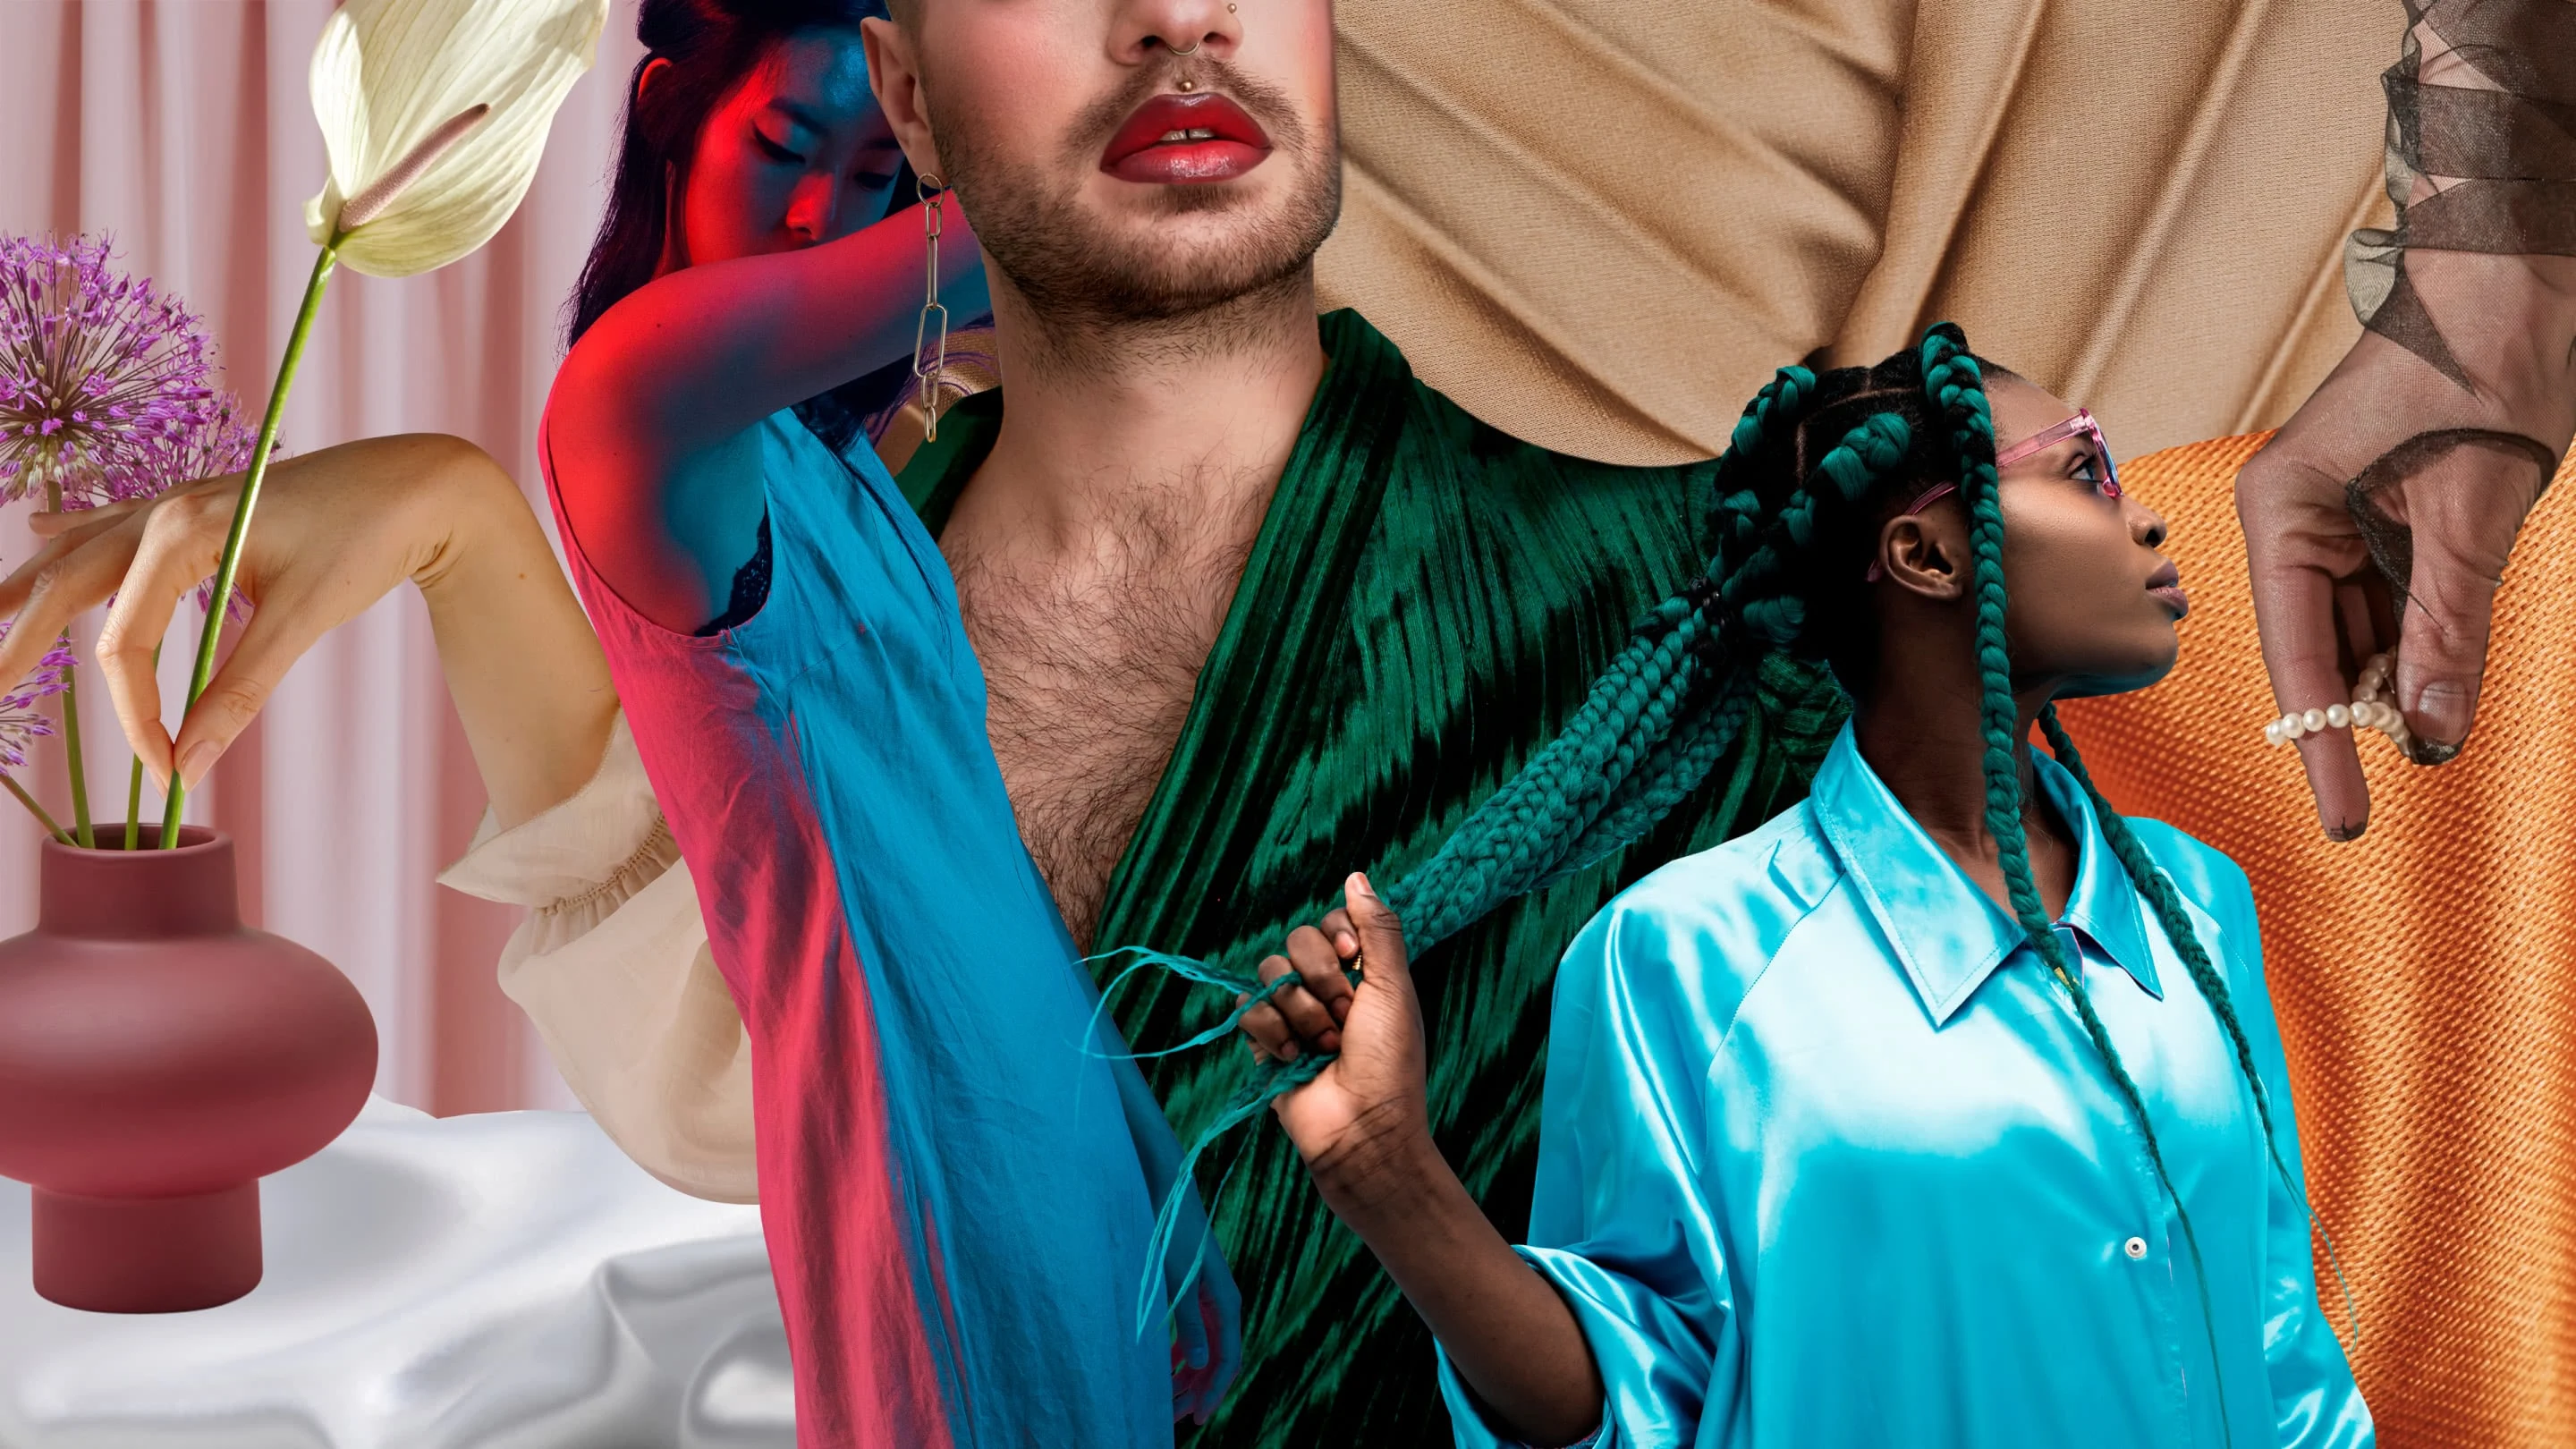 Collage of people wearing silky clothes. On the left, a white woman's hand is putting a lily into a vase. An East Asian woman is wearing a linen dress, beside a person with a beard and bright lipstick, wearing a green robe. A Black woman with long hair is wearing blue silk pajamas.